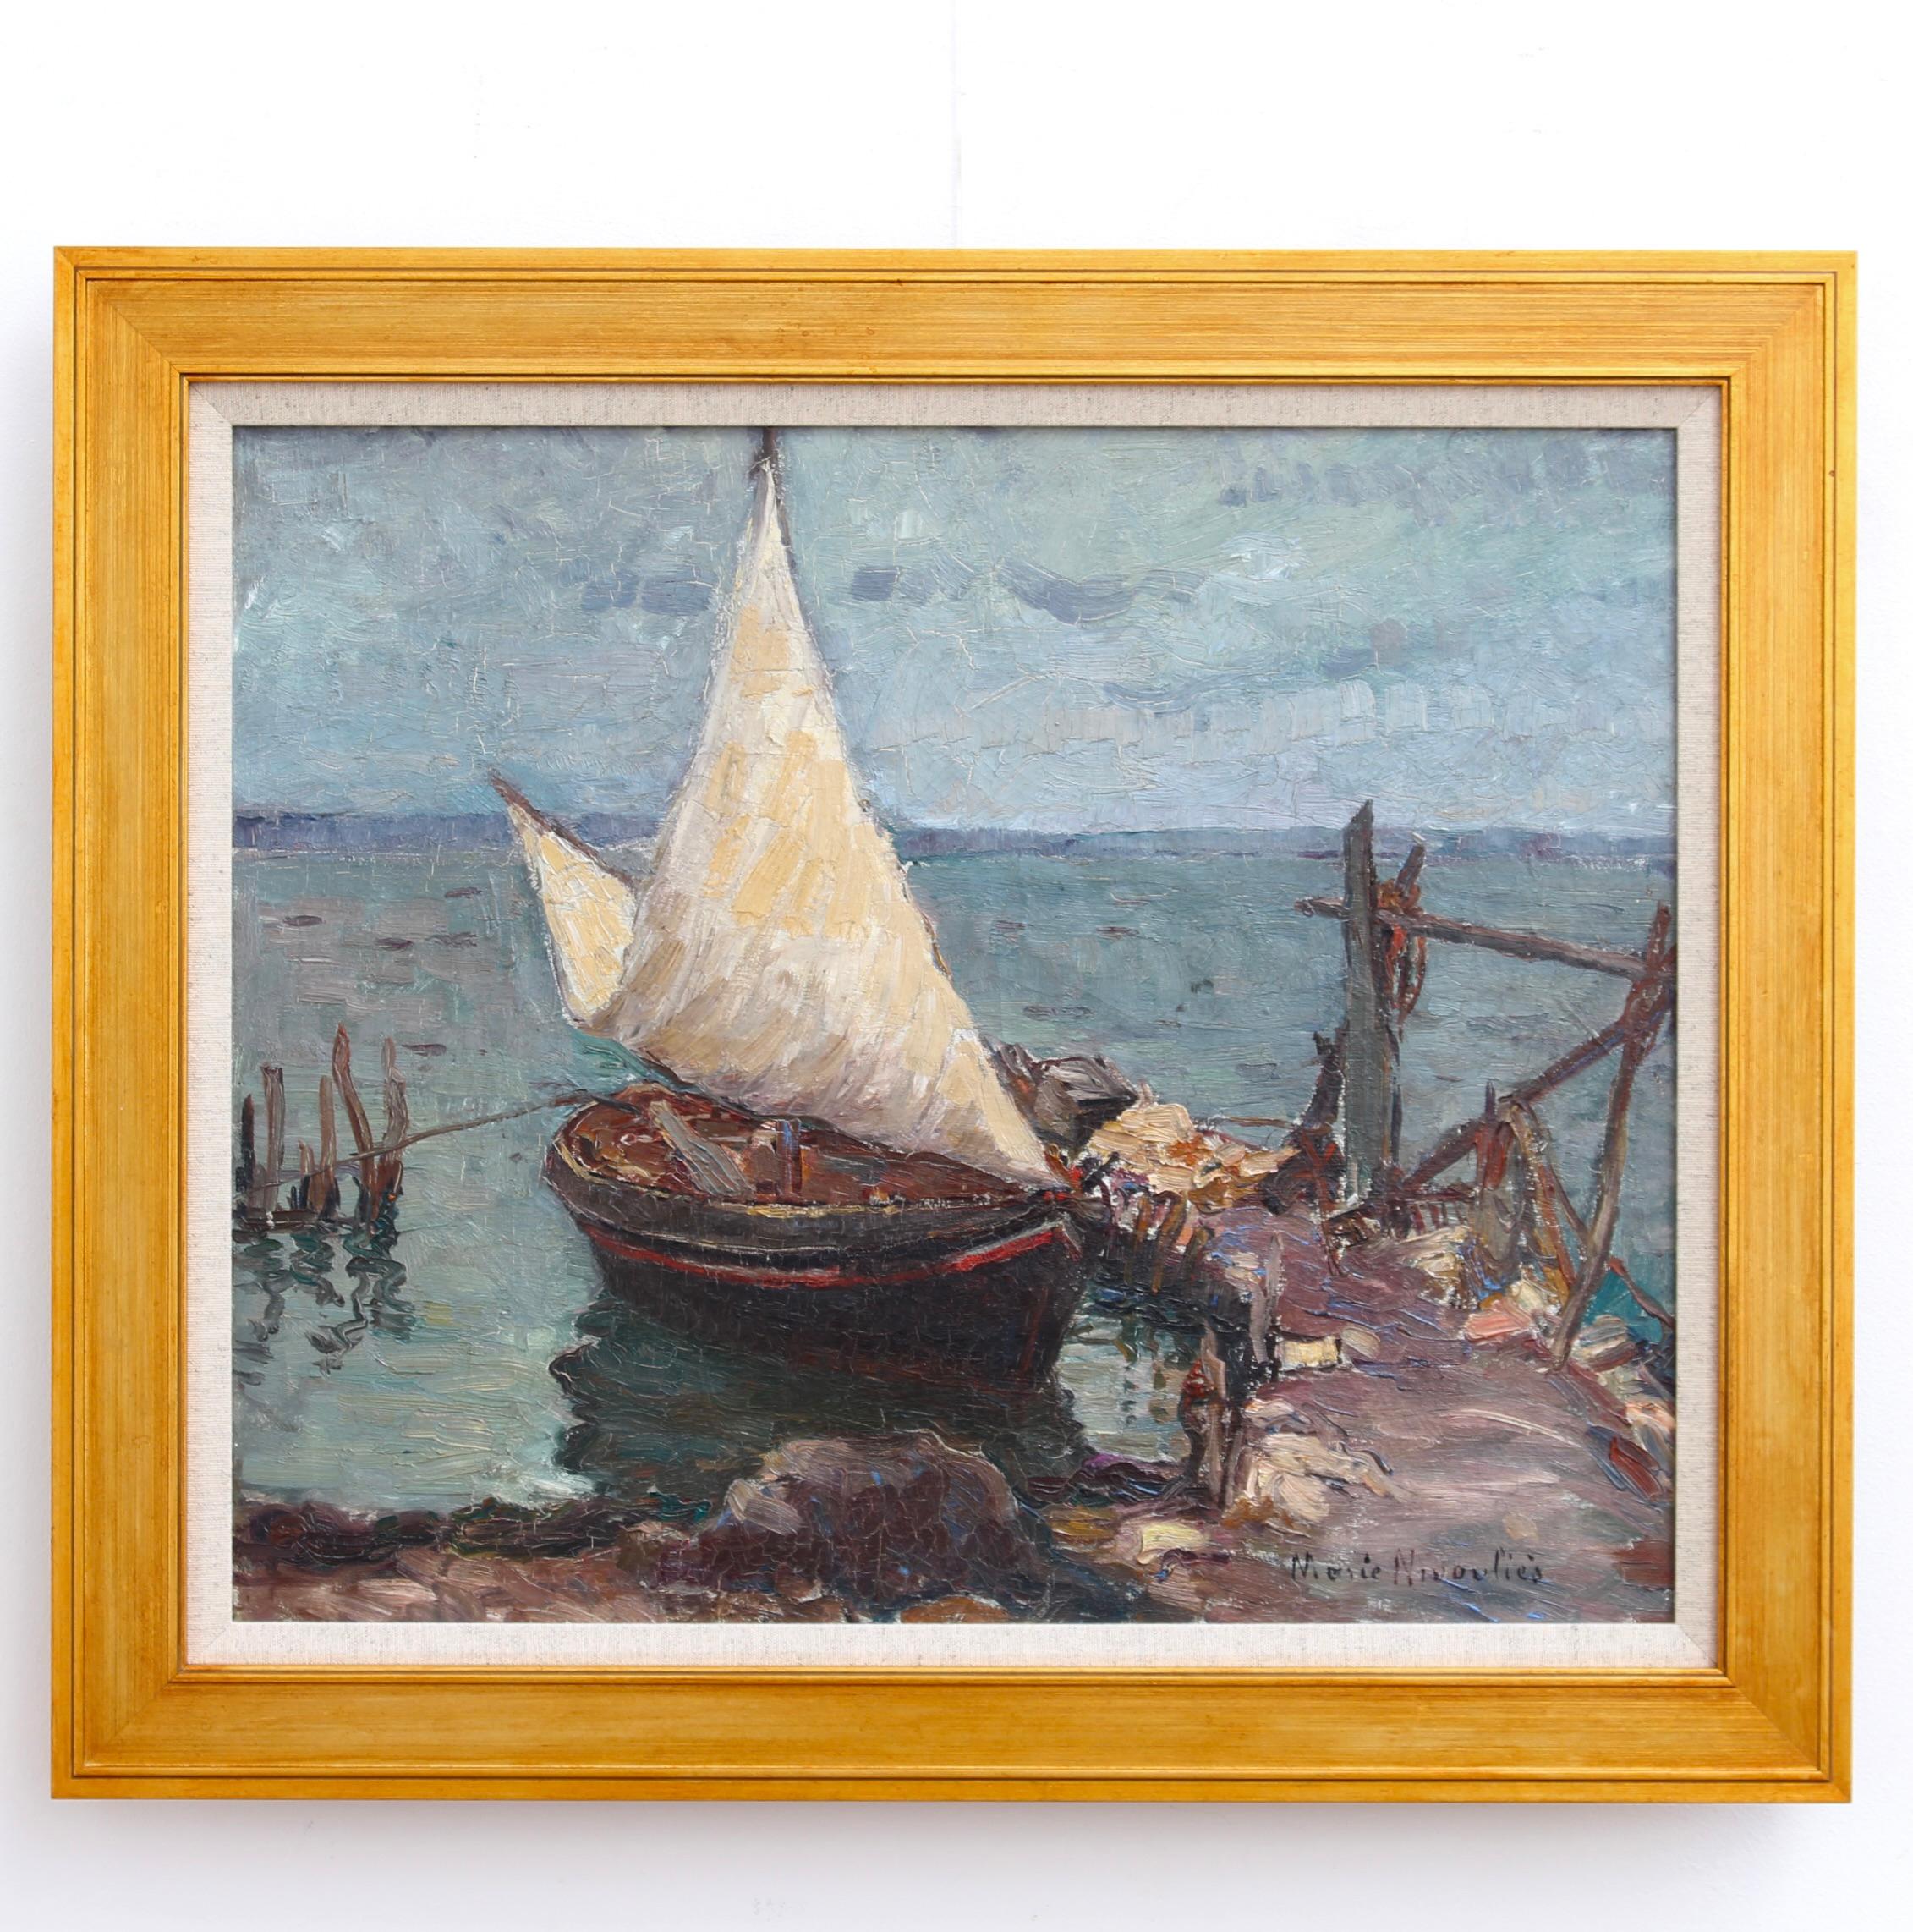 The Boat in Martigues, France - Painting by Marie-Anne Nivouliès de Pierrefort